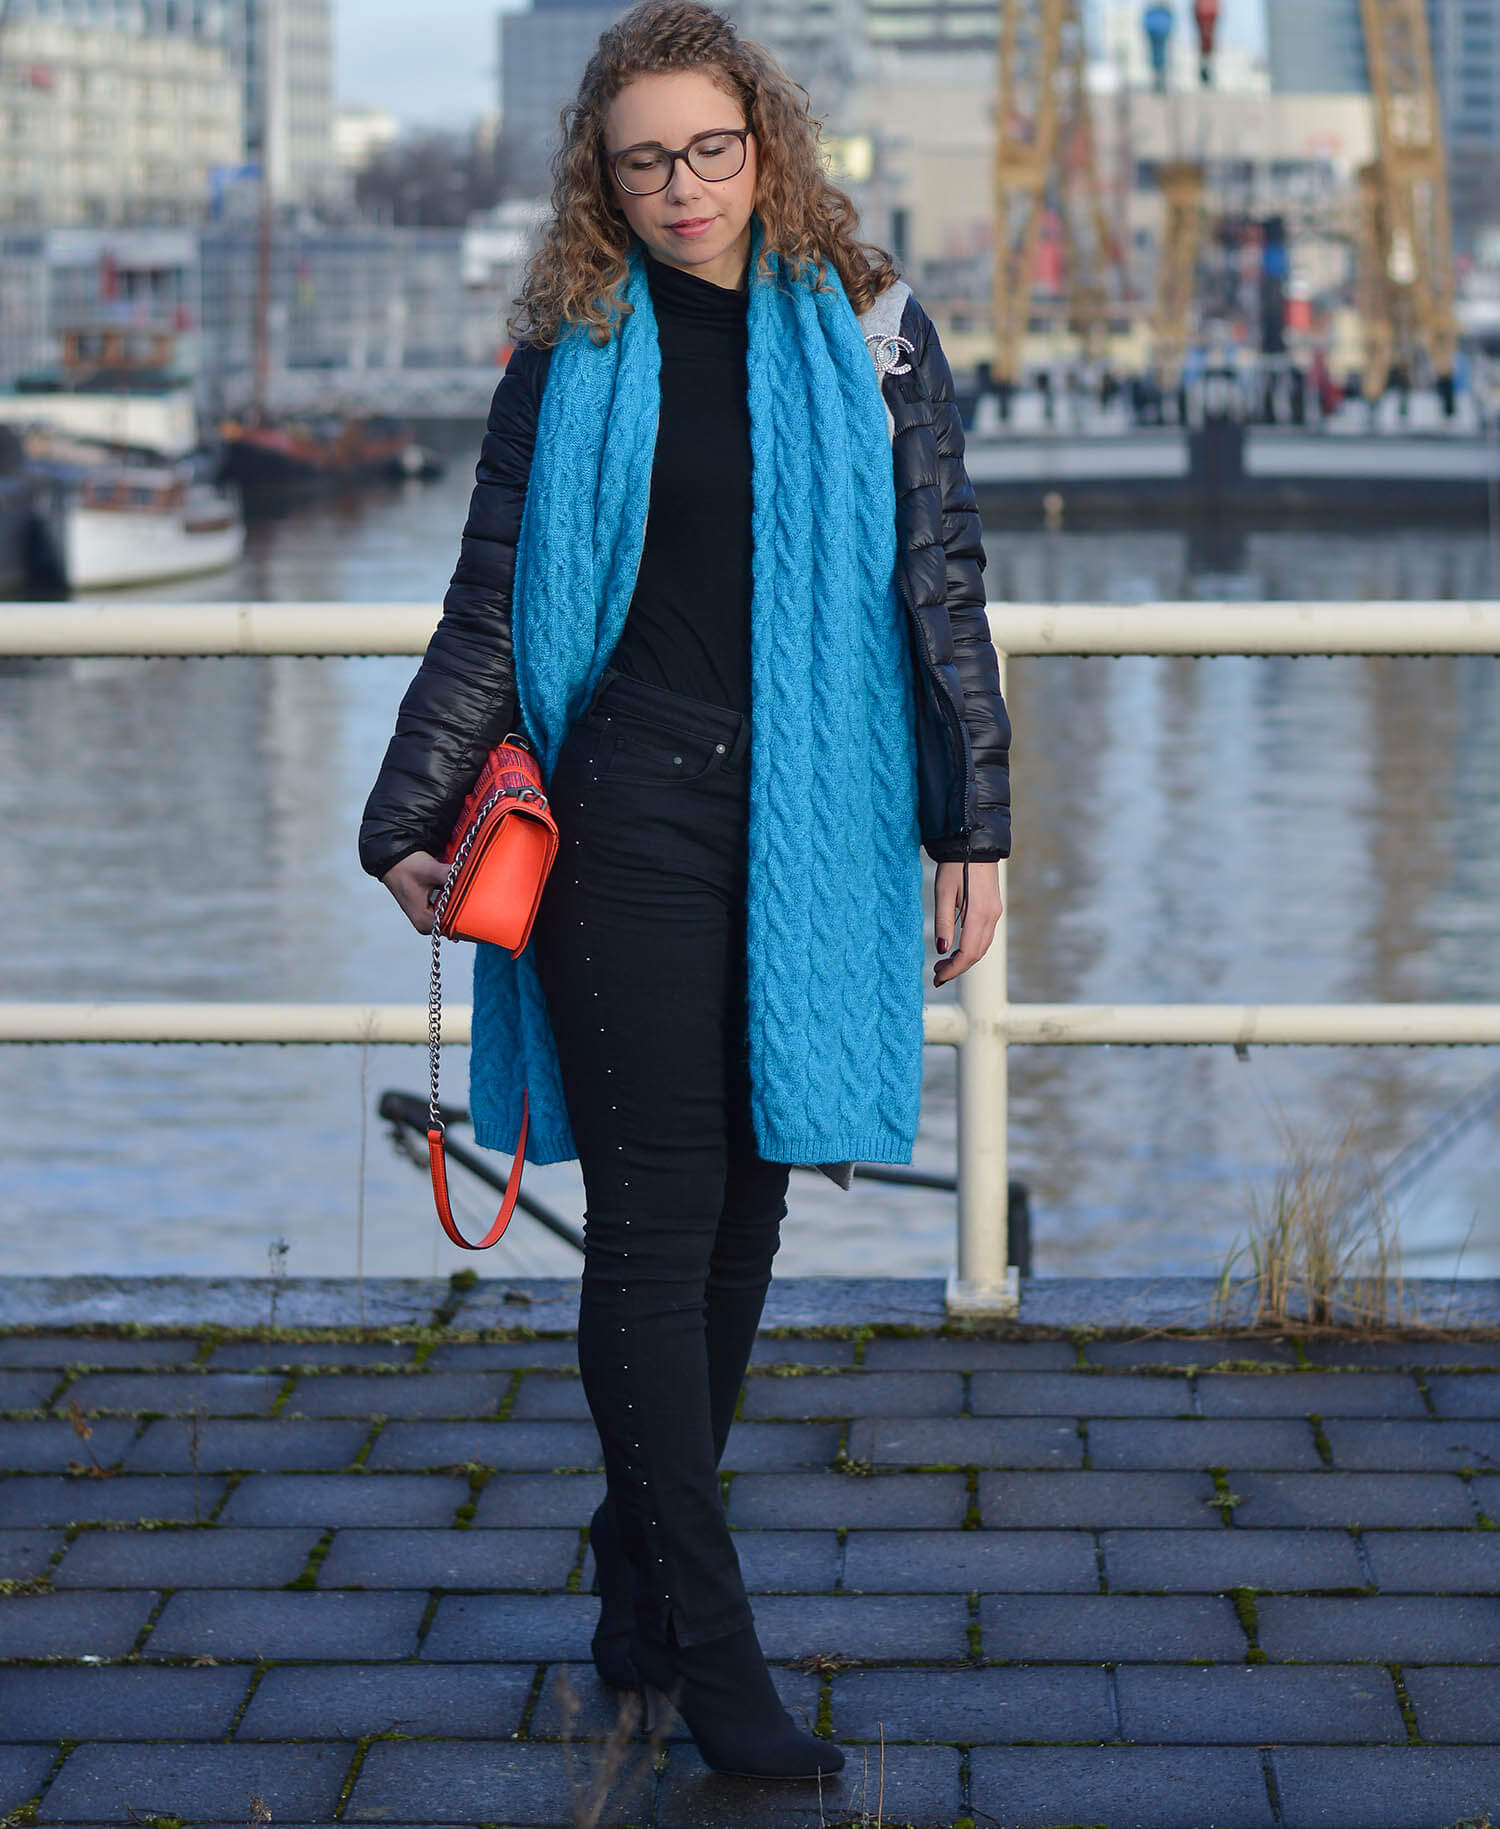 Outfit-Studded-Denim-Long-Cardigan-Sock-Boots-and-Zara-Scarf-Rotterdam-kationette-fashionblogger-streetstyle